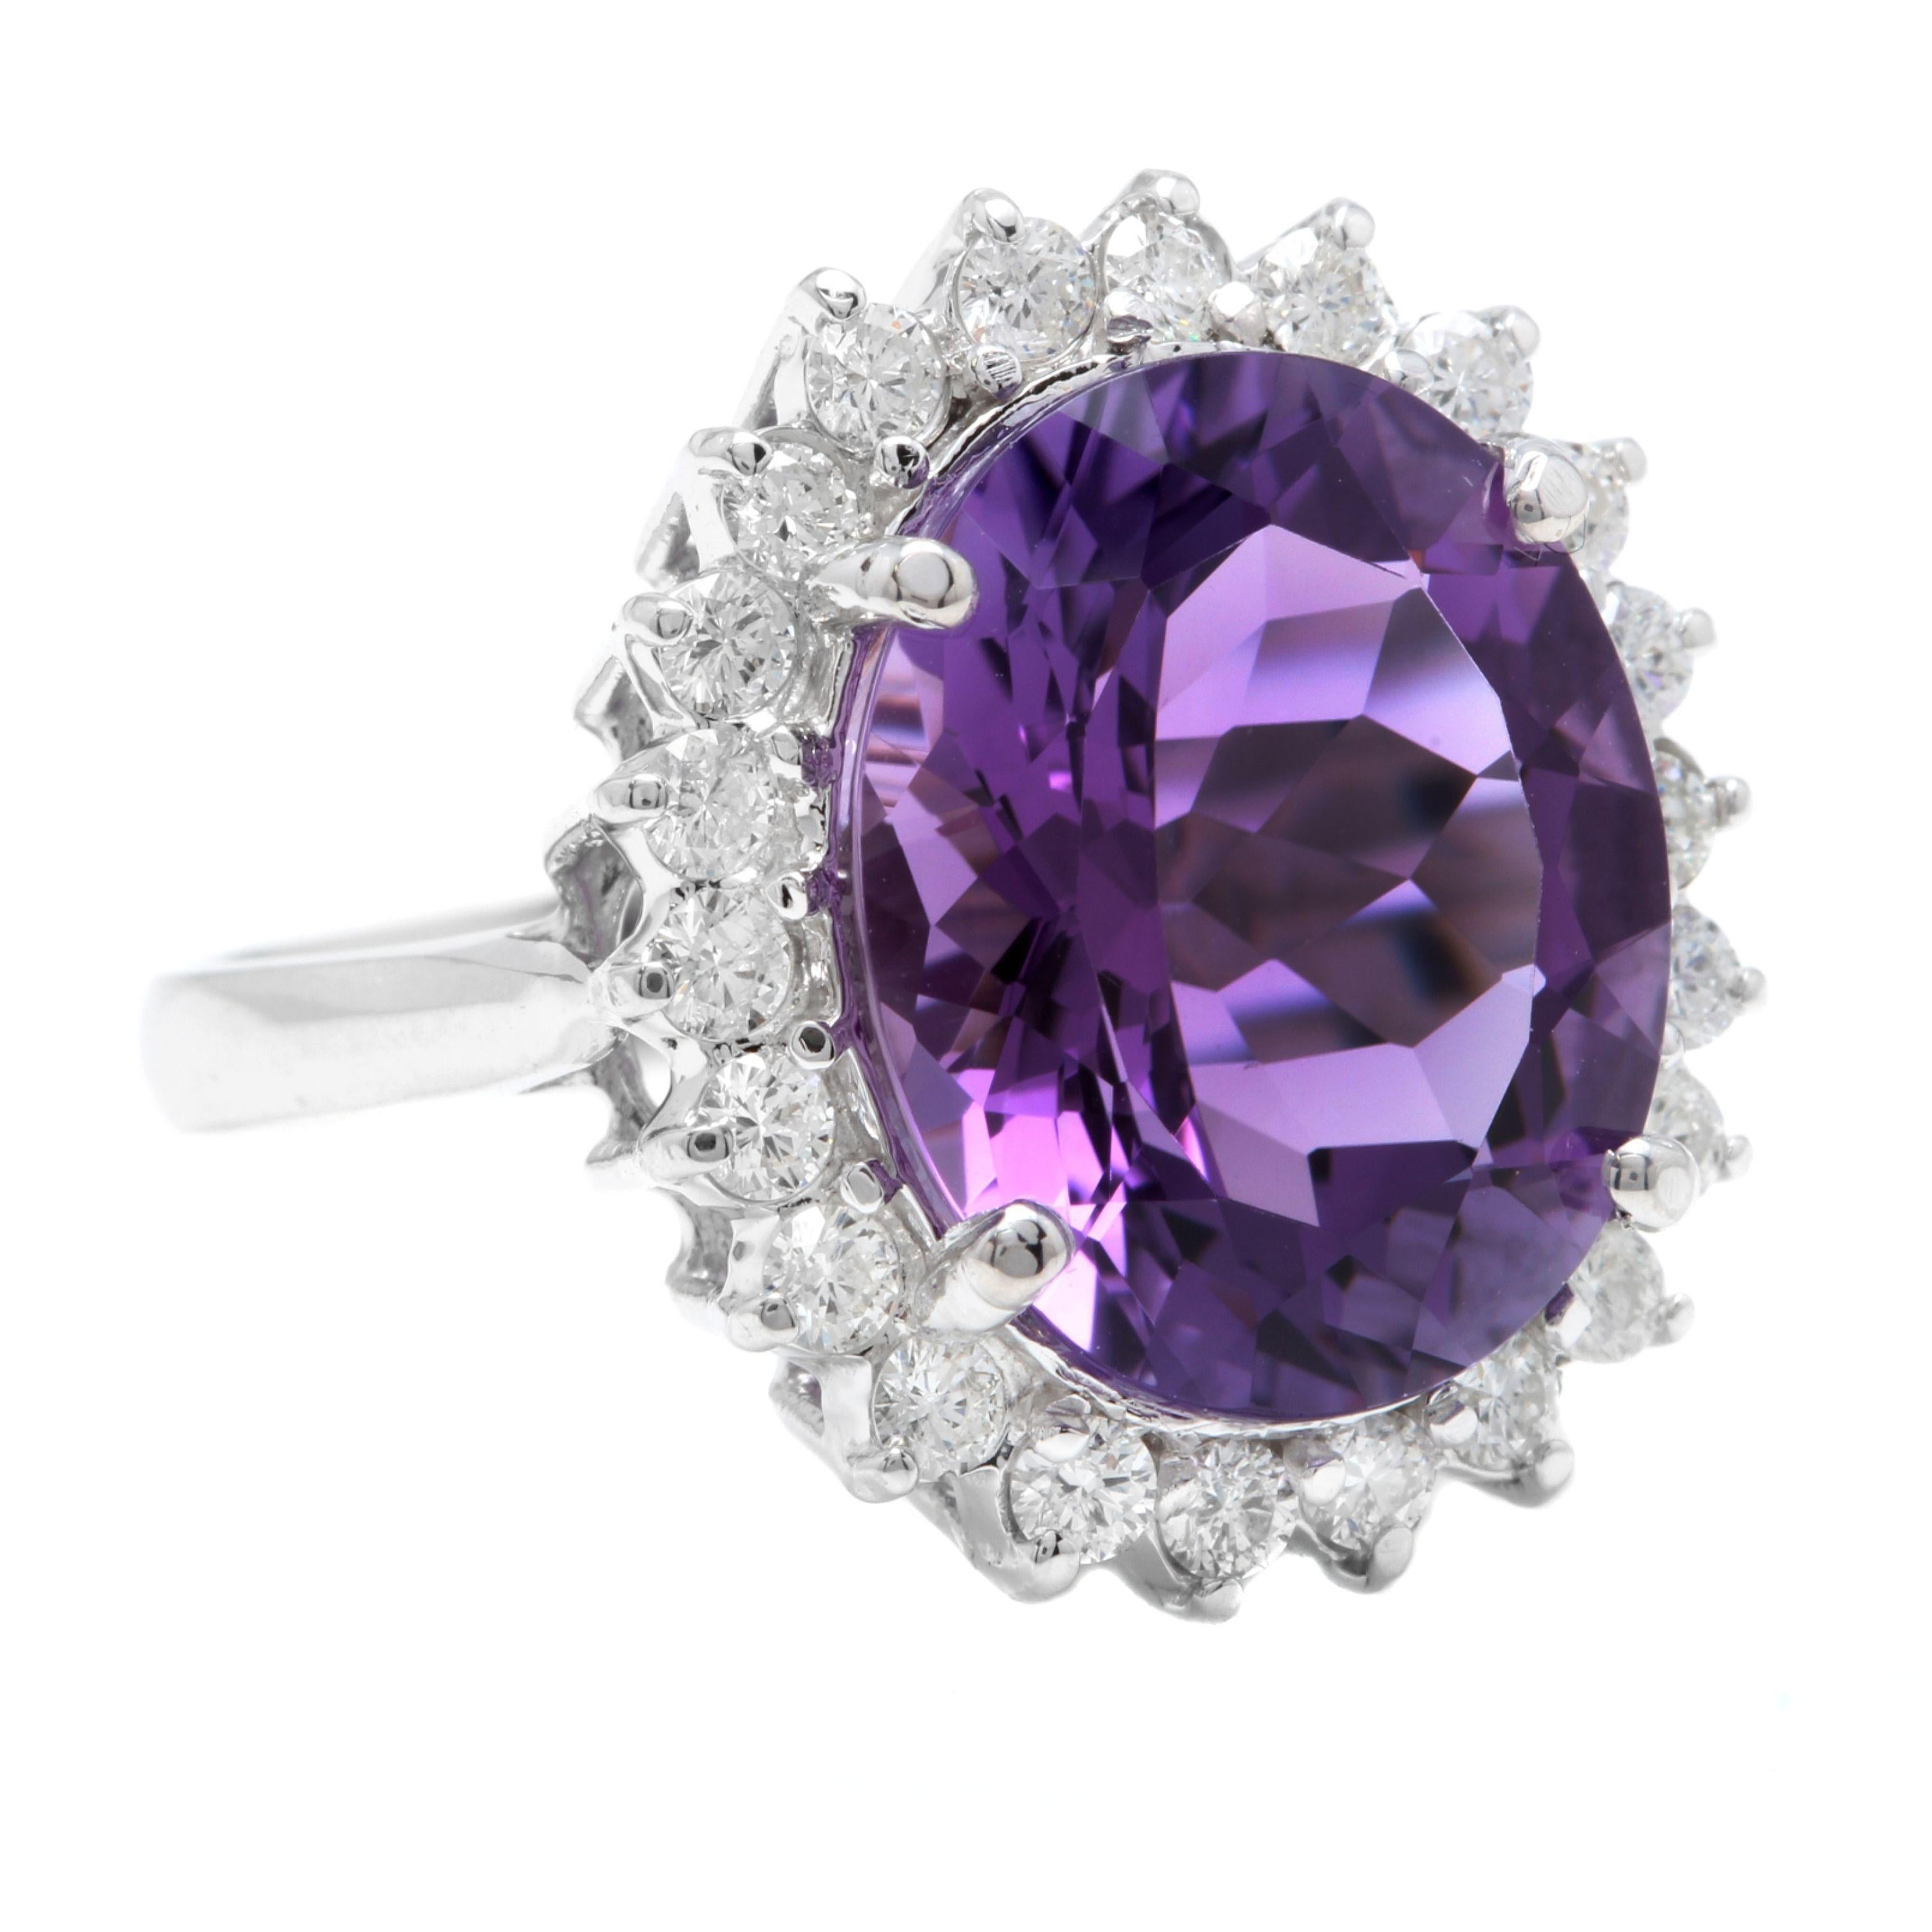 10.85 Carats Natural Amethyst and Diamond 18K Solid White Gold Ring

Total Natural Oval Shaped Amethyst Weights: Approx. 9.90 Carats 

Amethyst Measures: 16.00 x 12.00mm

Natural Round Diamonds Weight: .95 Carats (color G-H / Clarity SI1-SI2)

Ring